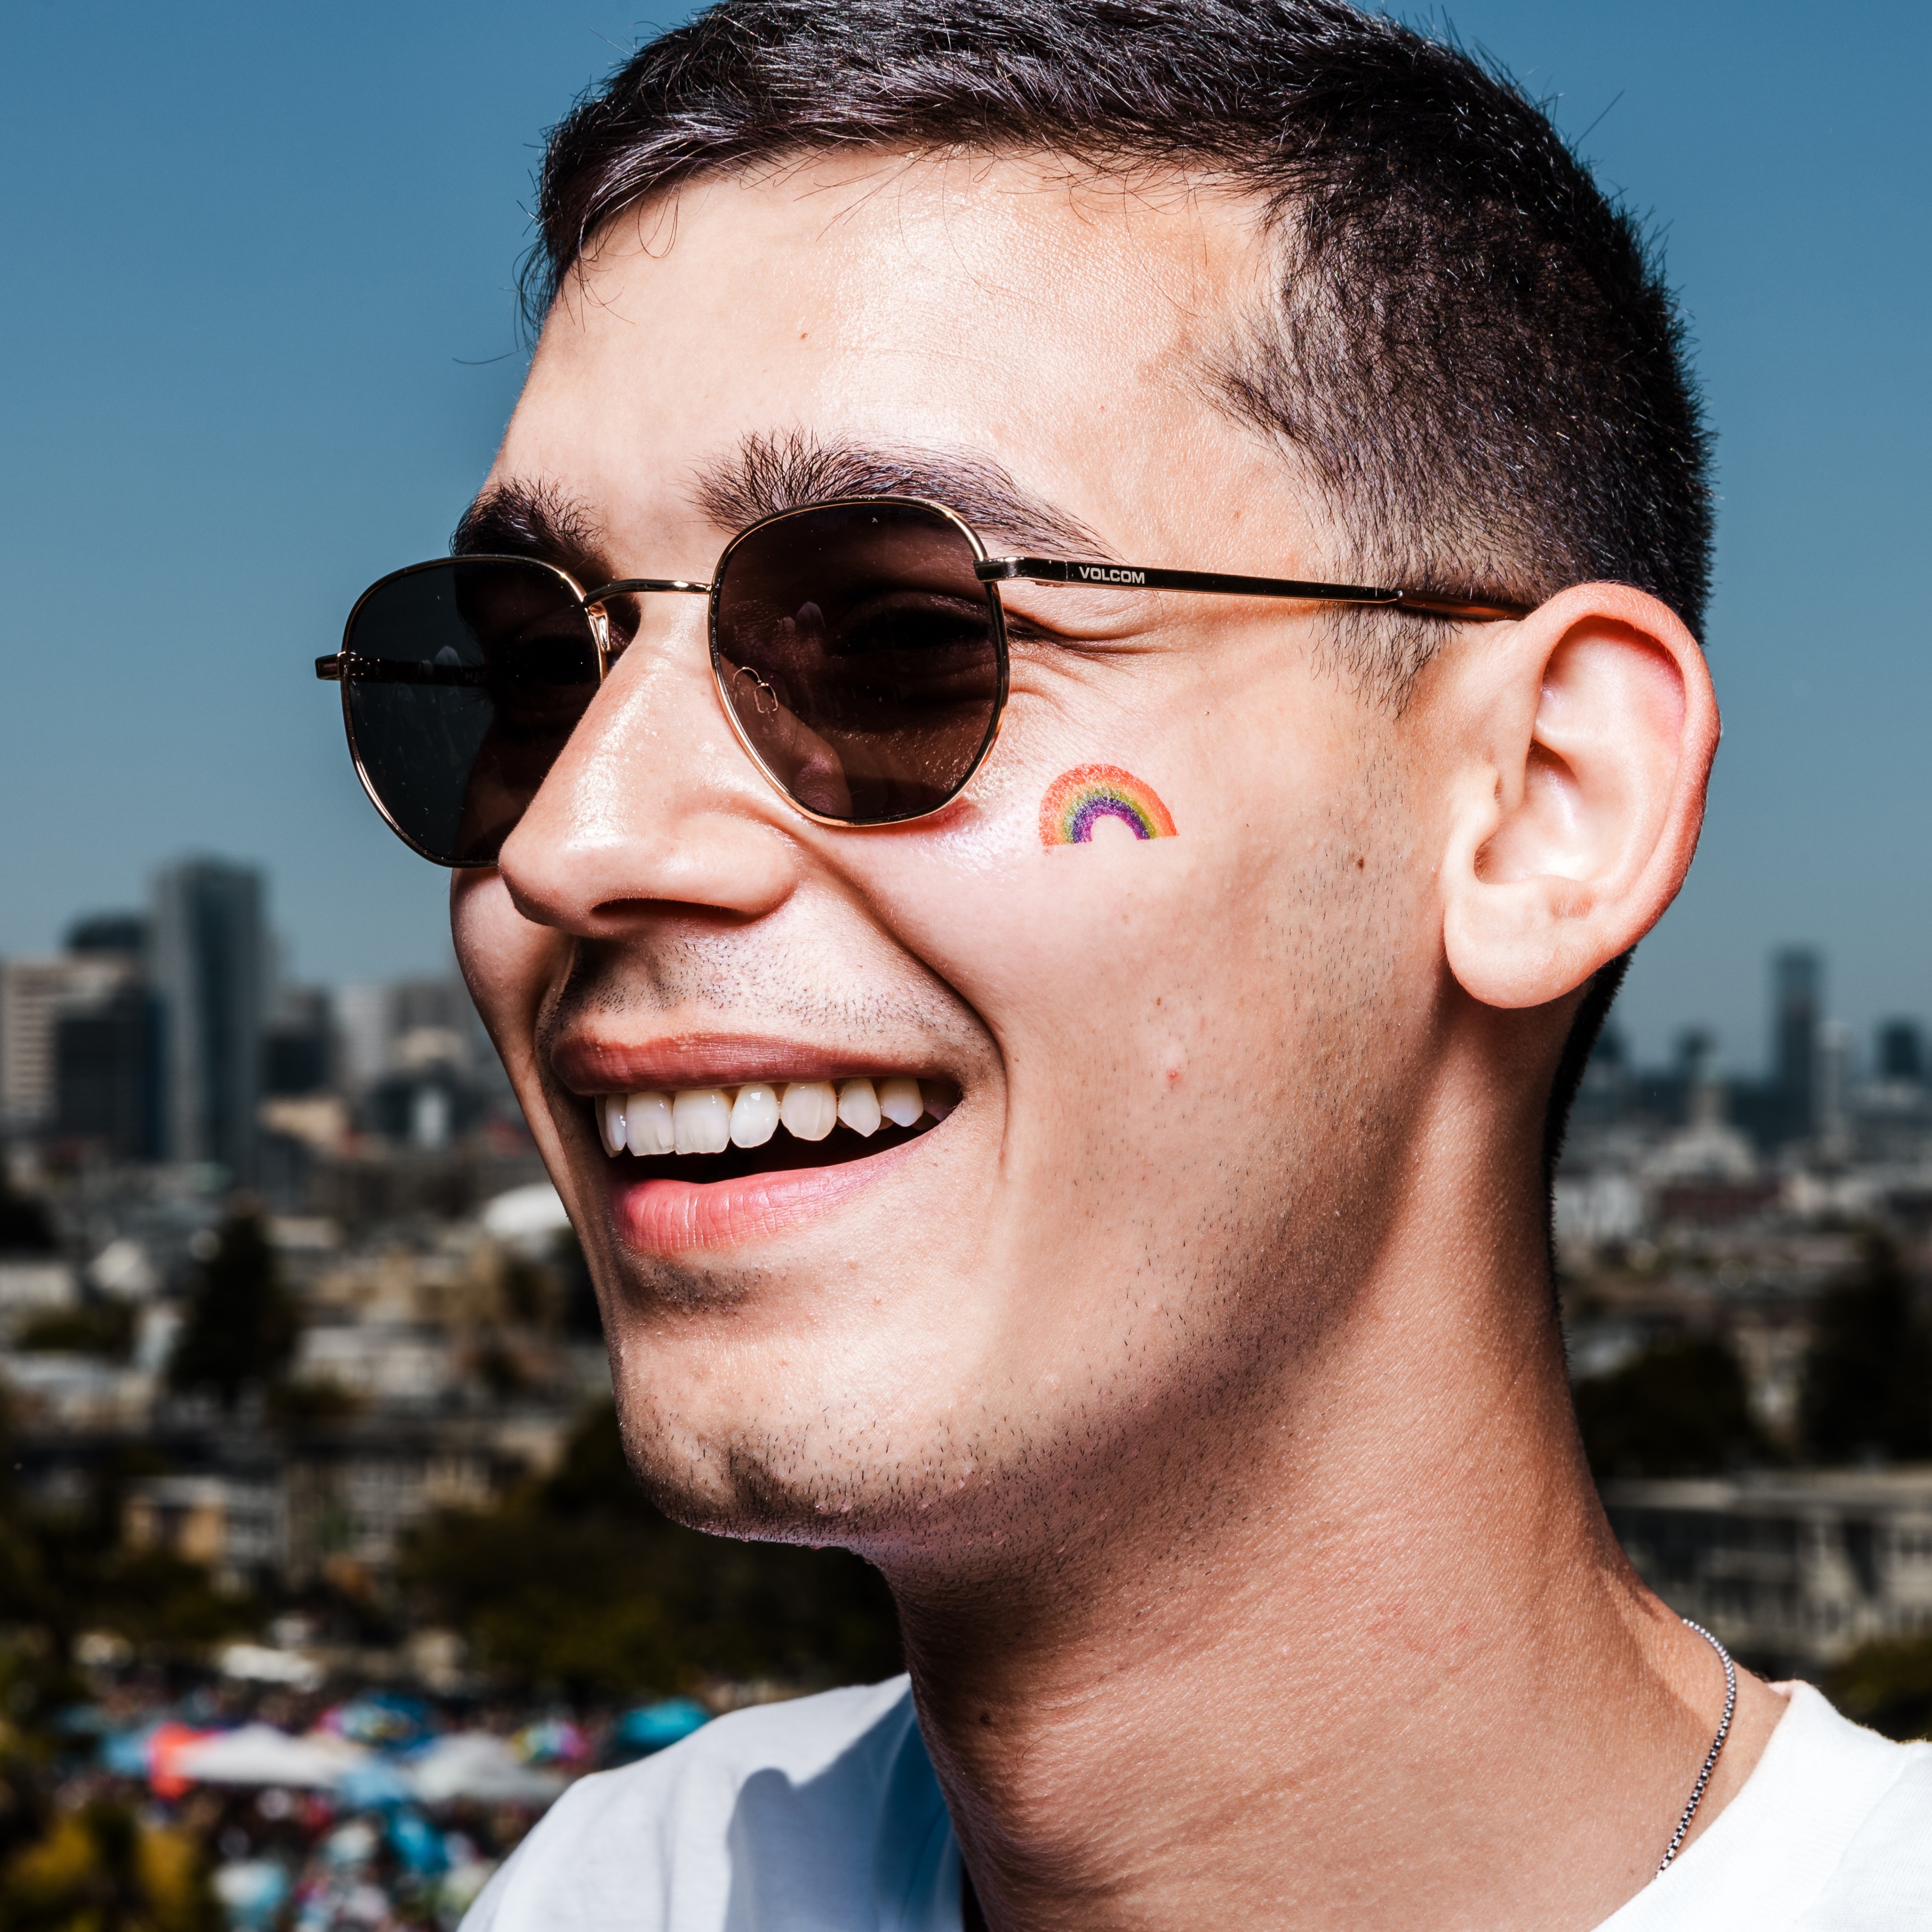 A smiling person with short hair and sunglasses has a small rainbow sticker on their cheek, with a cityscape backdrop under a clear blue sky.